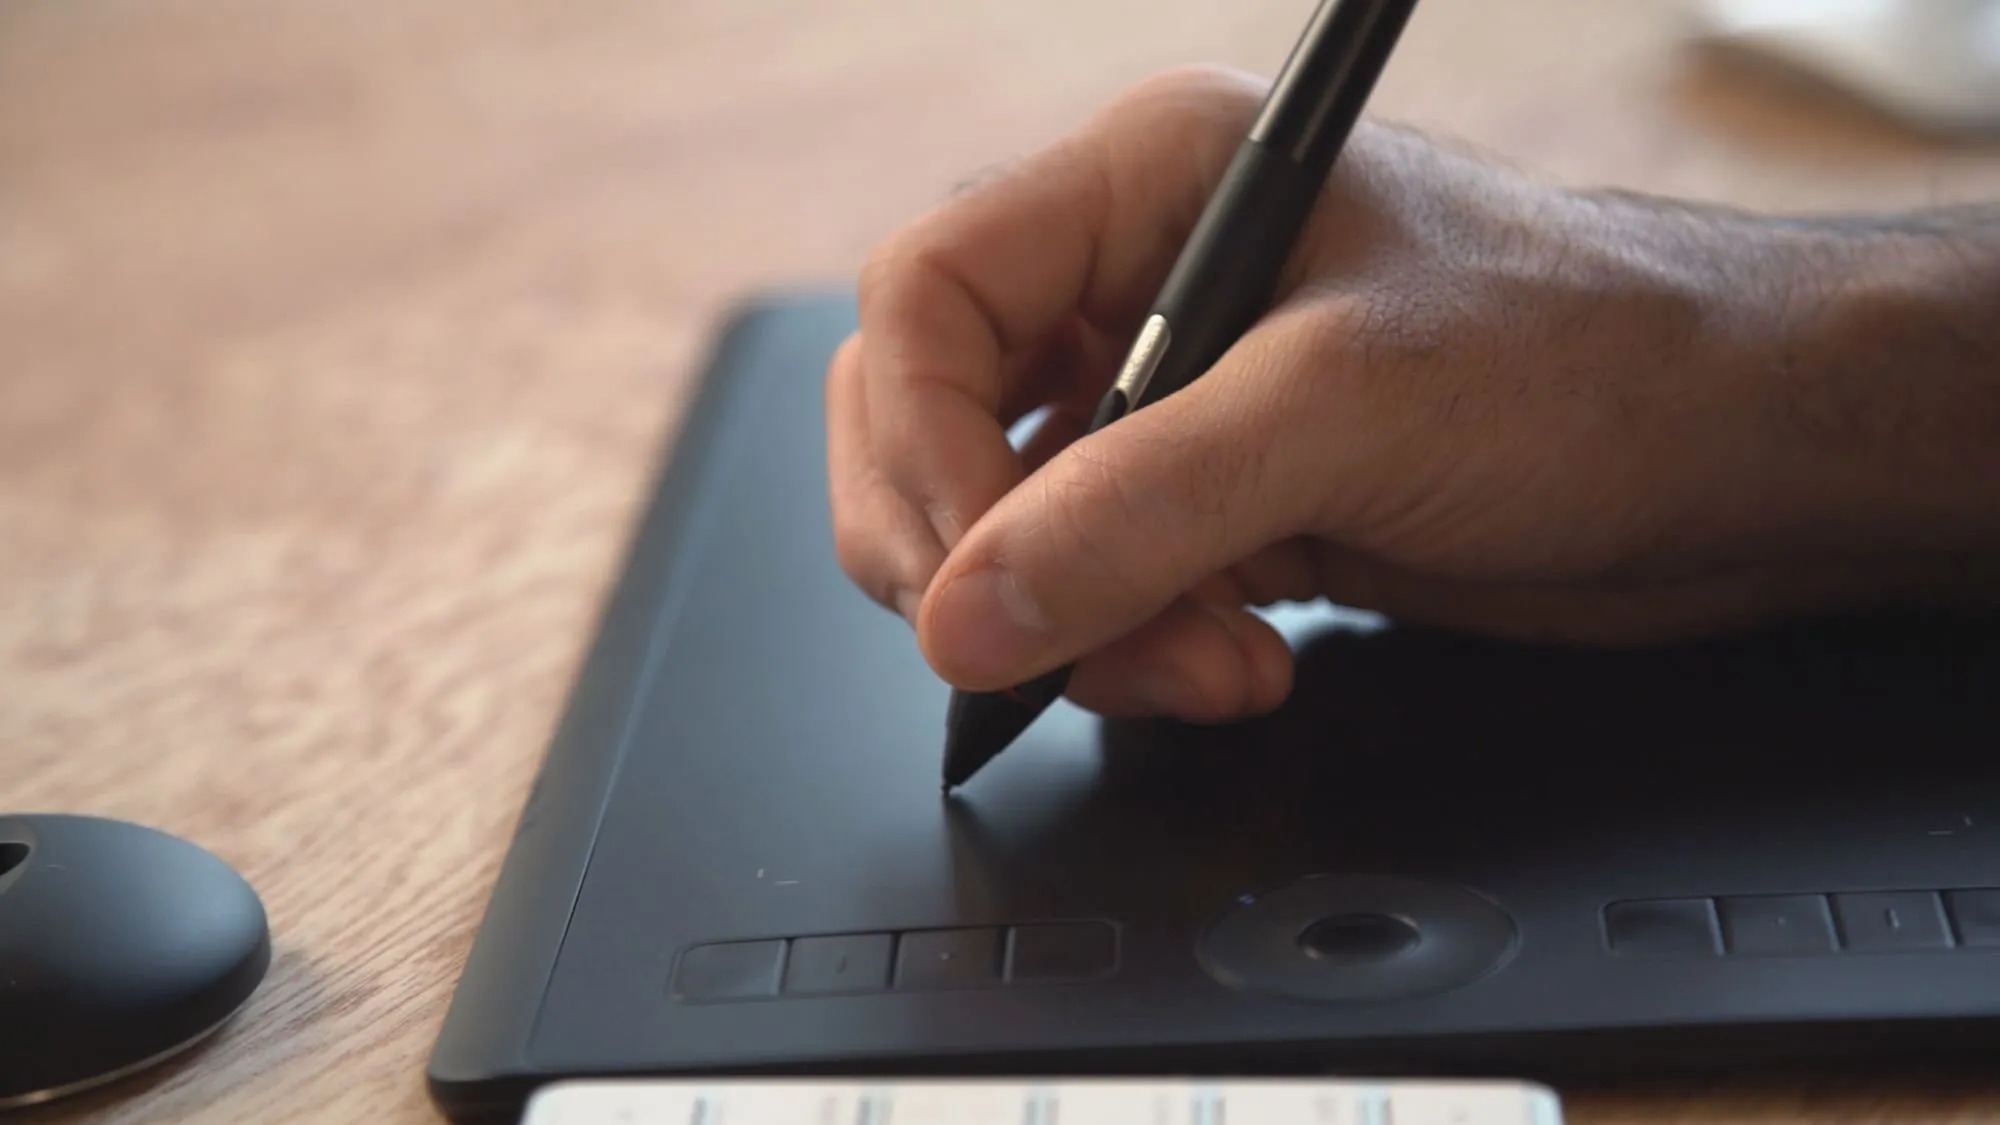 How To Change Wacom Tablet To Left Handed